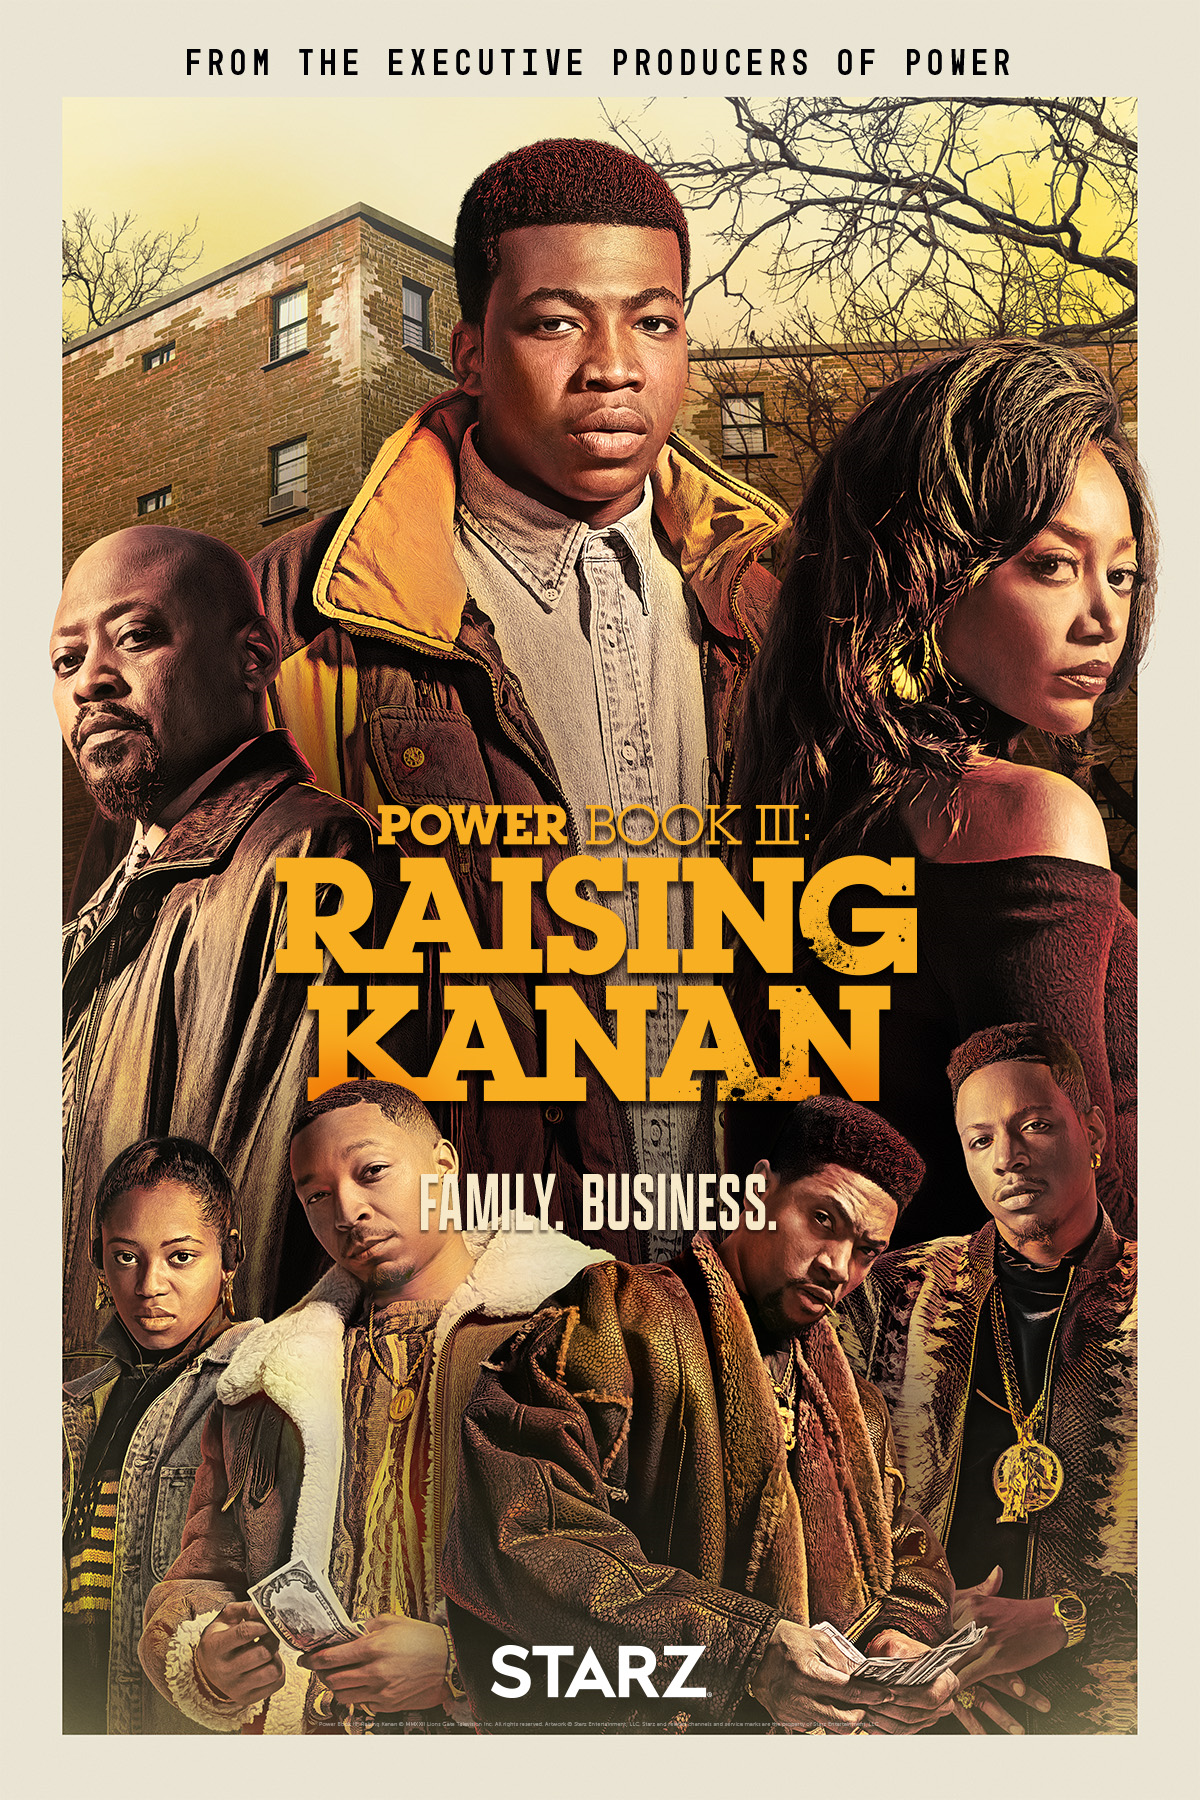 A poster featuring the cast of Power Book III: Raising Kanan, dressed in various coats and holding money, with a brick building behind them.